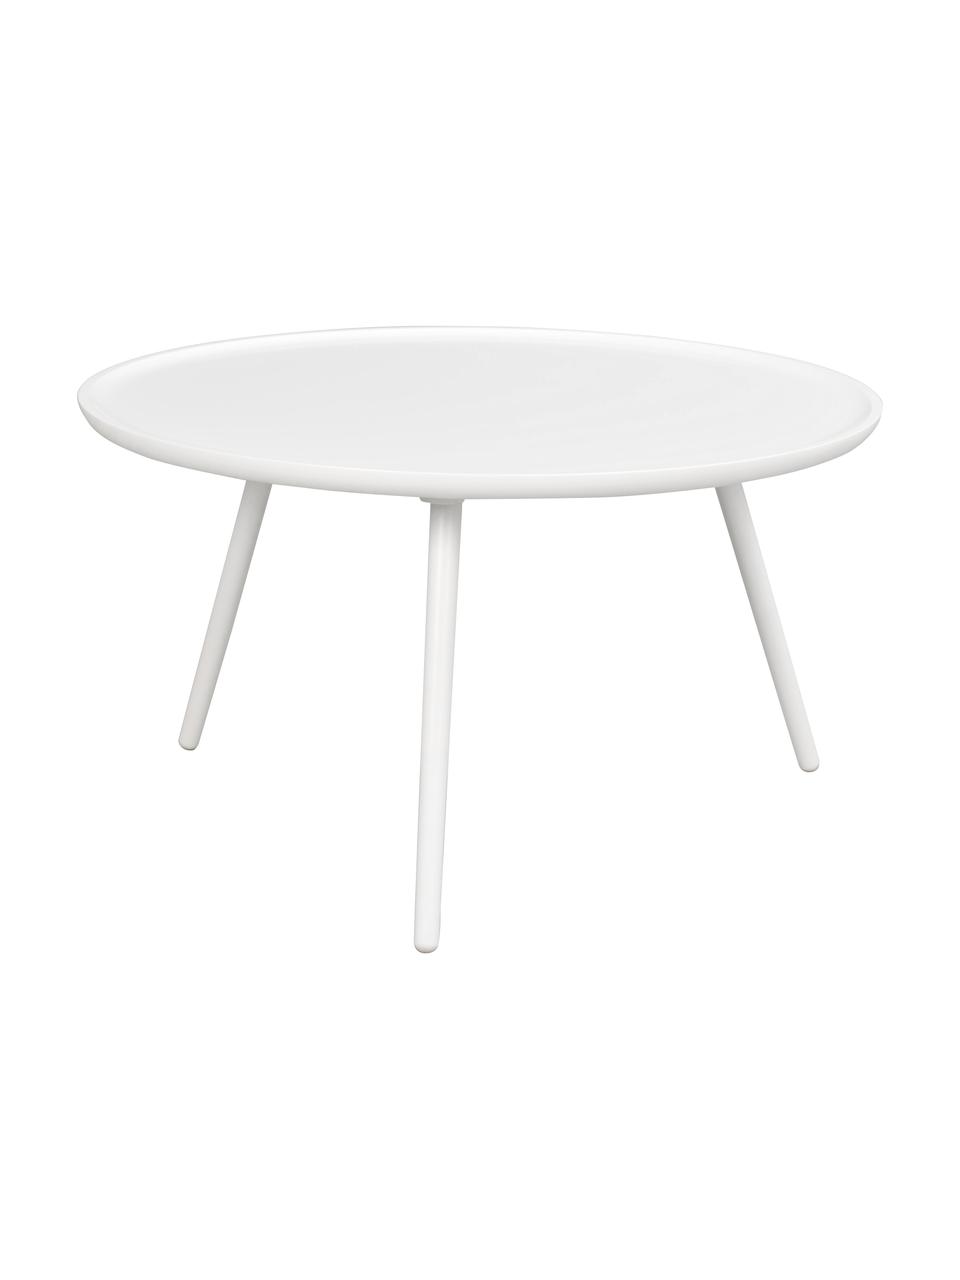 Table basse ronde blanche Daisy, Blanc